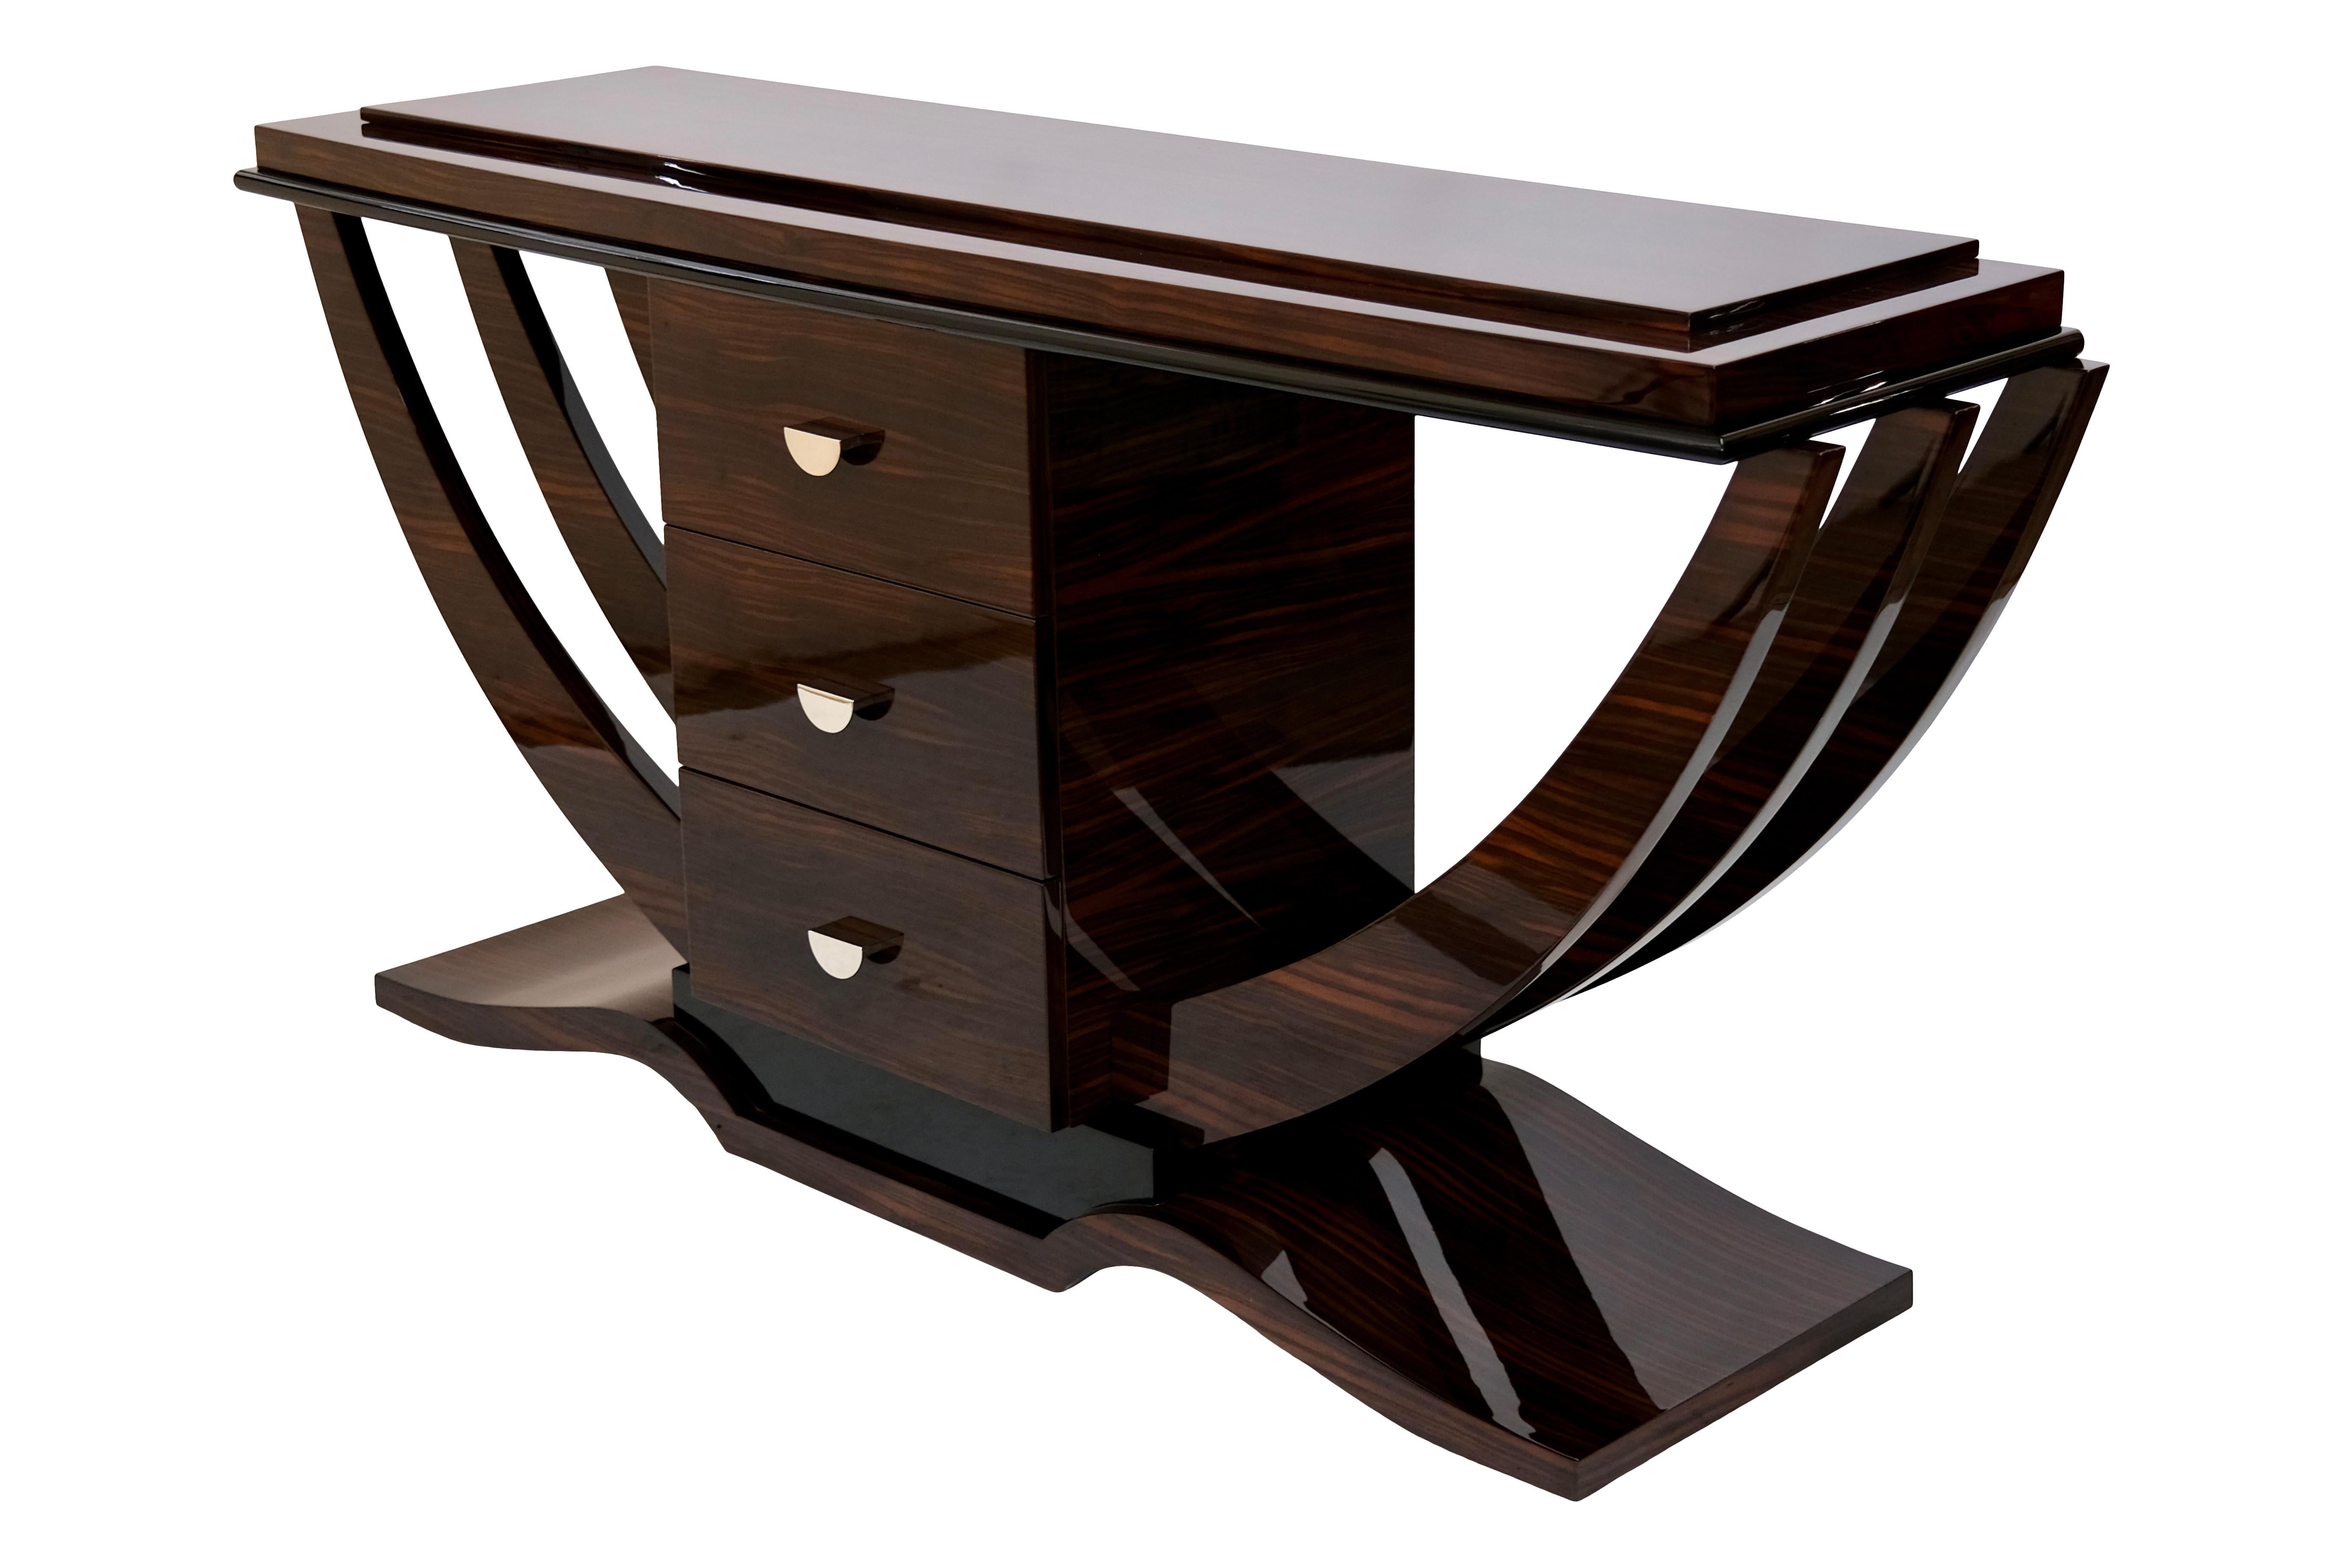 German Art Deco Style Console Table with Macassar Veneer in High Gloss Lacquer For Sale